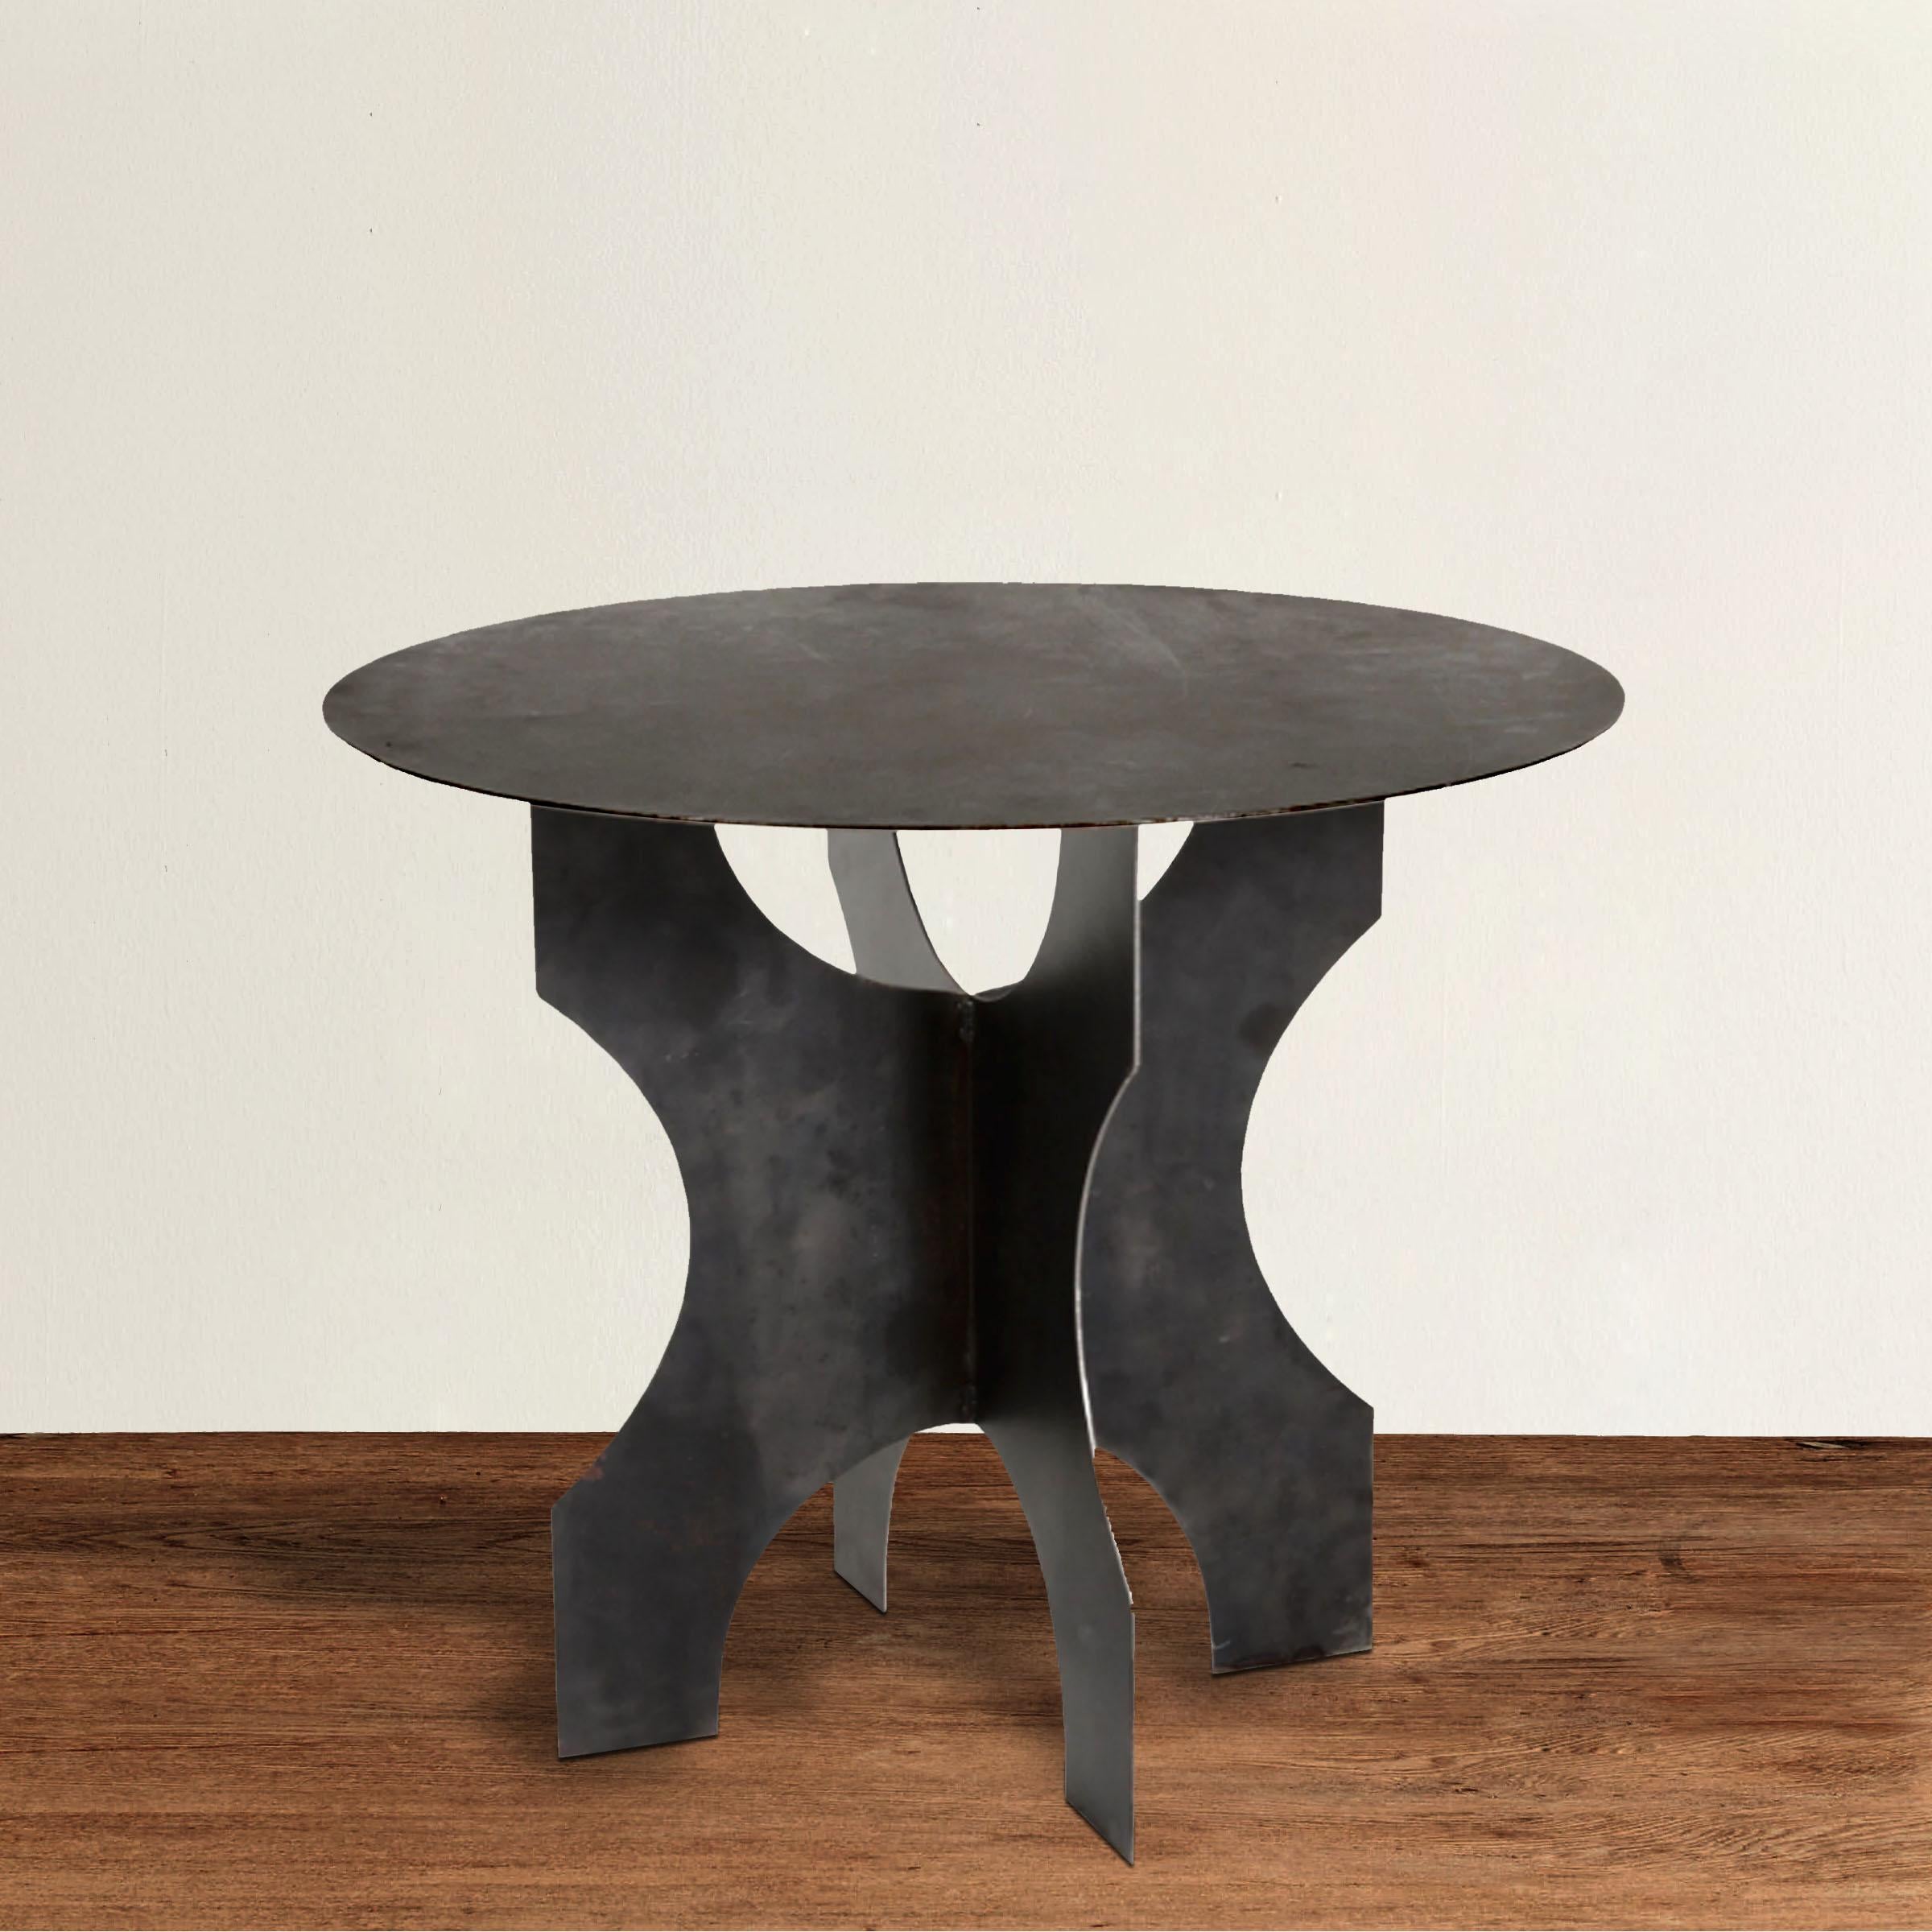 An uber chic modern steel round table with a Brutalist attitude, constructed with four legs welded together under a round top.